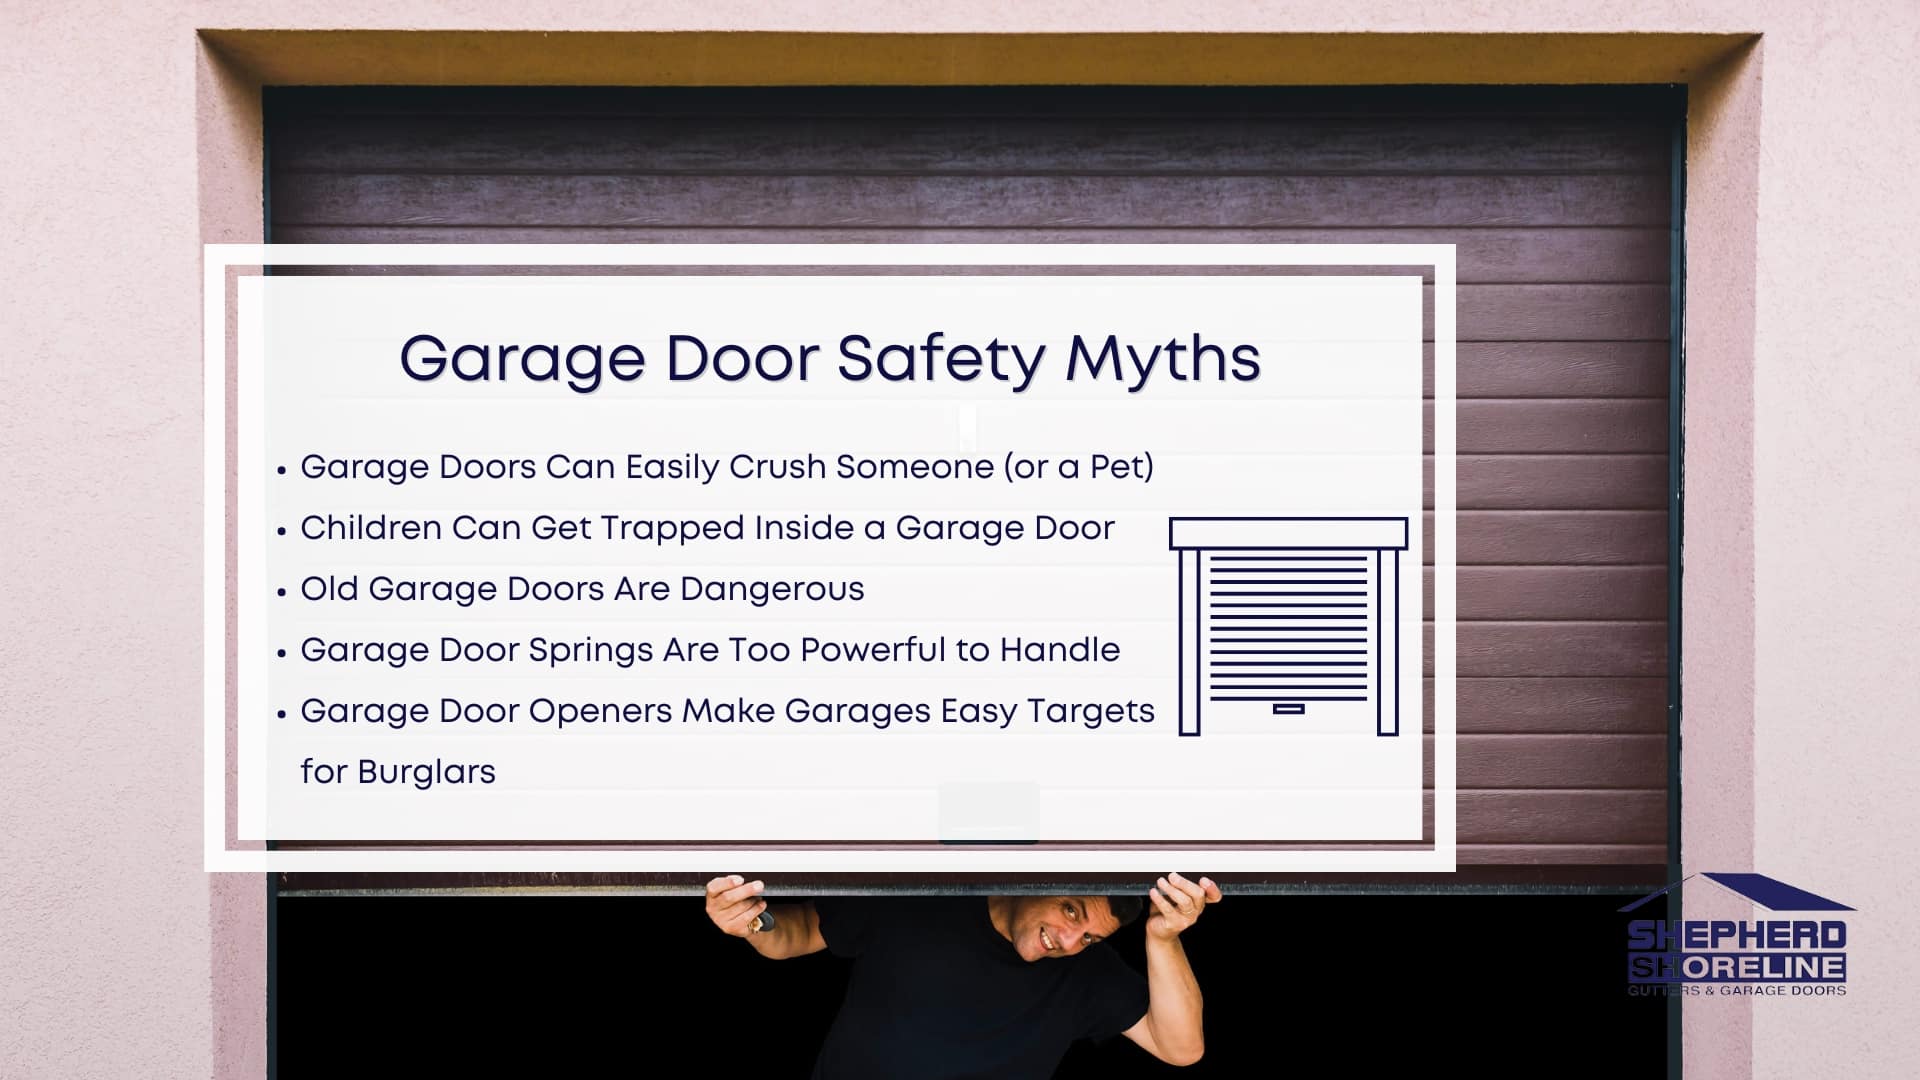 Infographic image of garage door safety myths